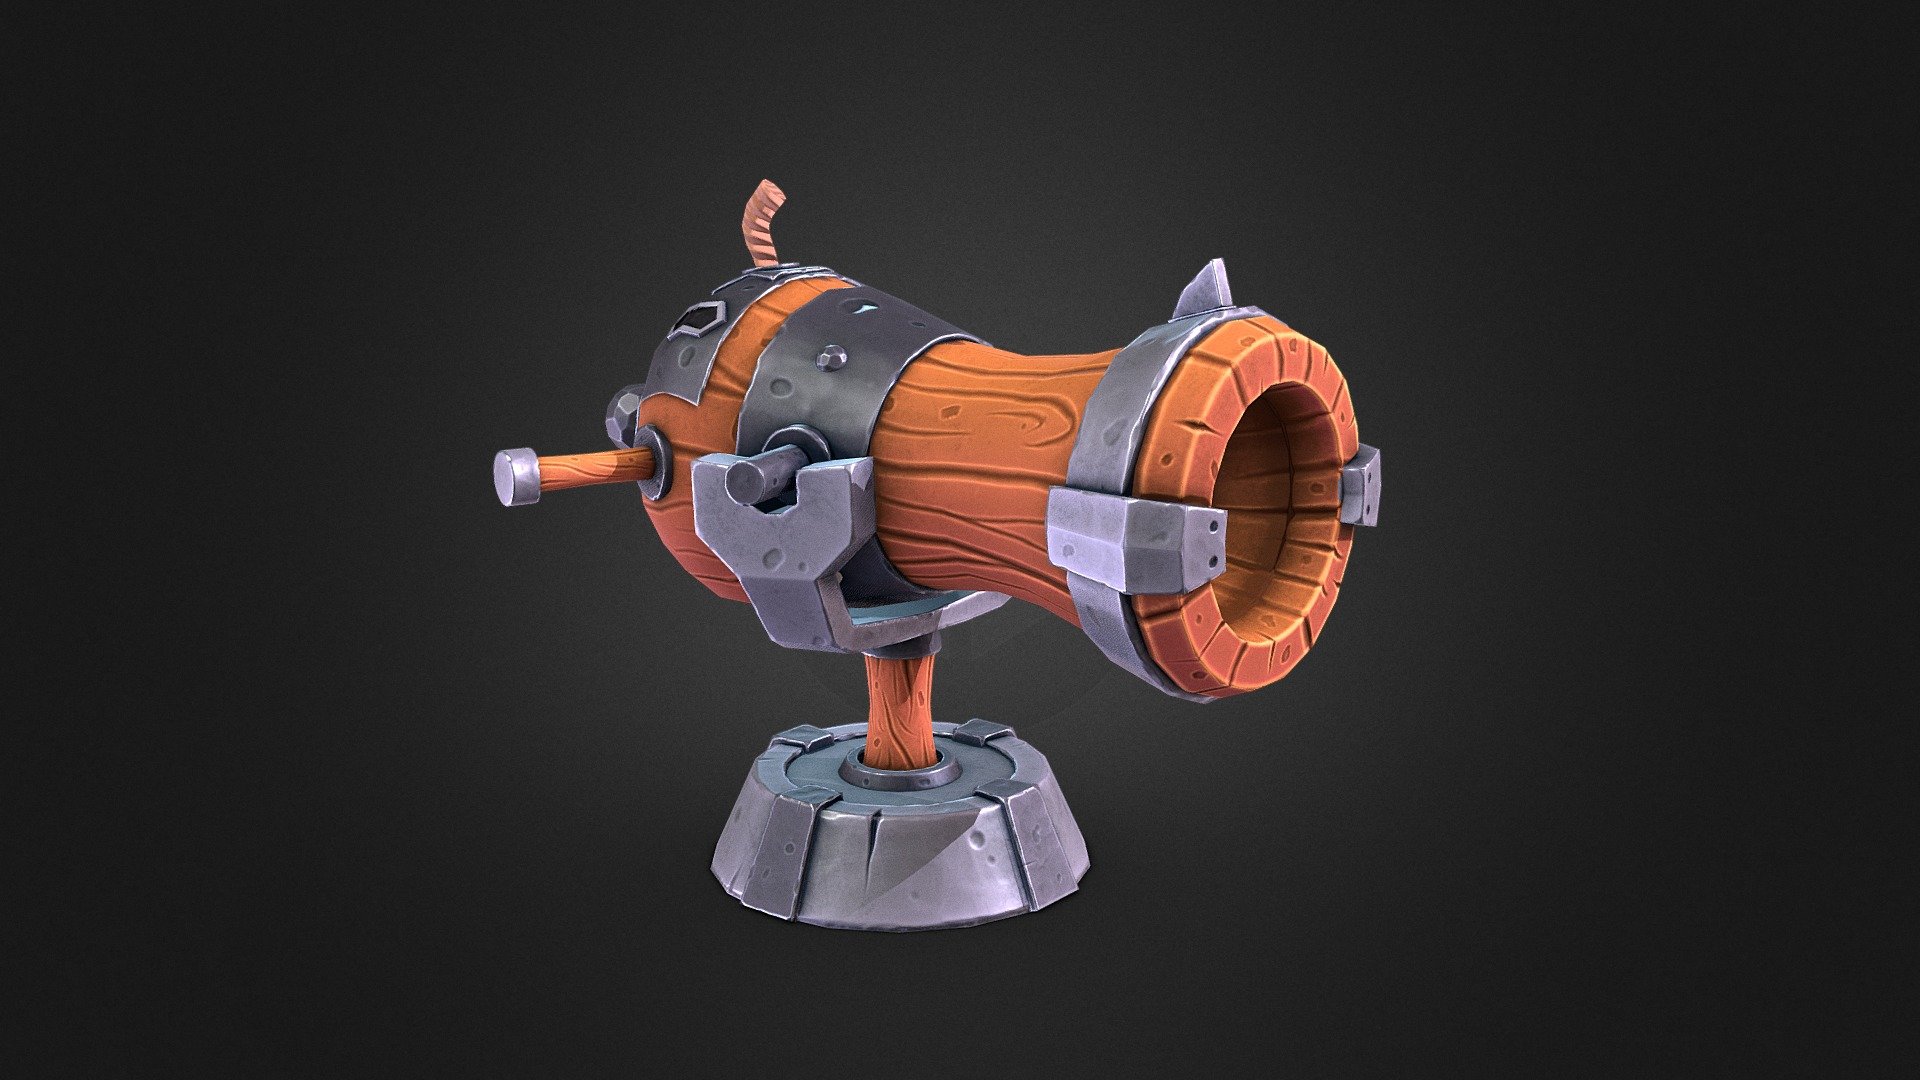 Hi all :) In this model I have tried to model a stylized cannon based on a great concept by Alexsandr Paraskun. 

You can check the original concept from below :)
https://www.artstation.com/princez

Thanks :) - Stylized Low Poly Cannon - 3D model by Burak Özcan (@ozcanburak8) 3d model